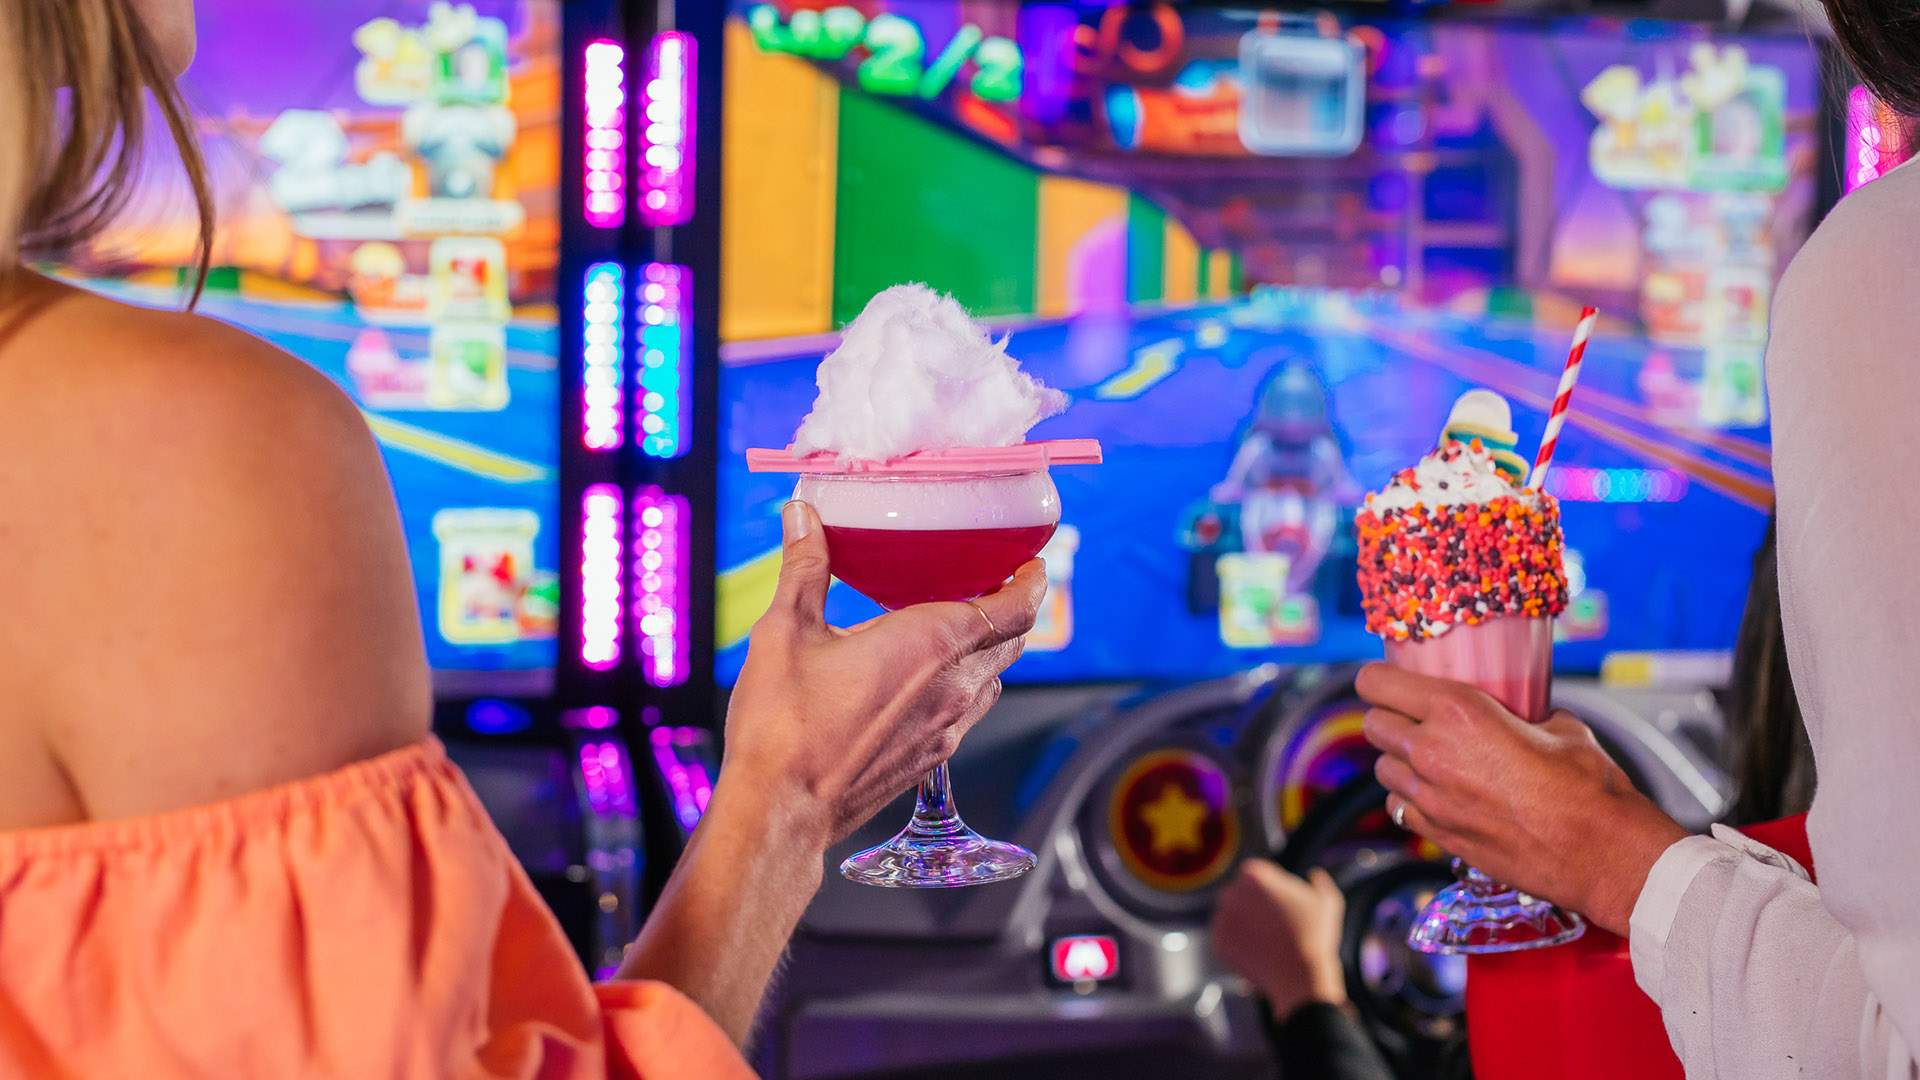 Coming Soon: Archie Brothers Cirque Electriq Is Moving Its Arcade Games and OTT Cocktails to Bowen Hills